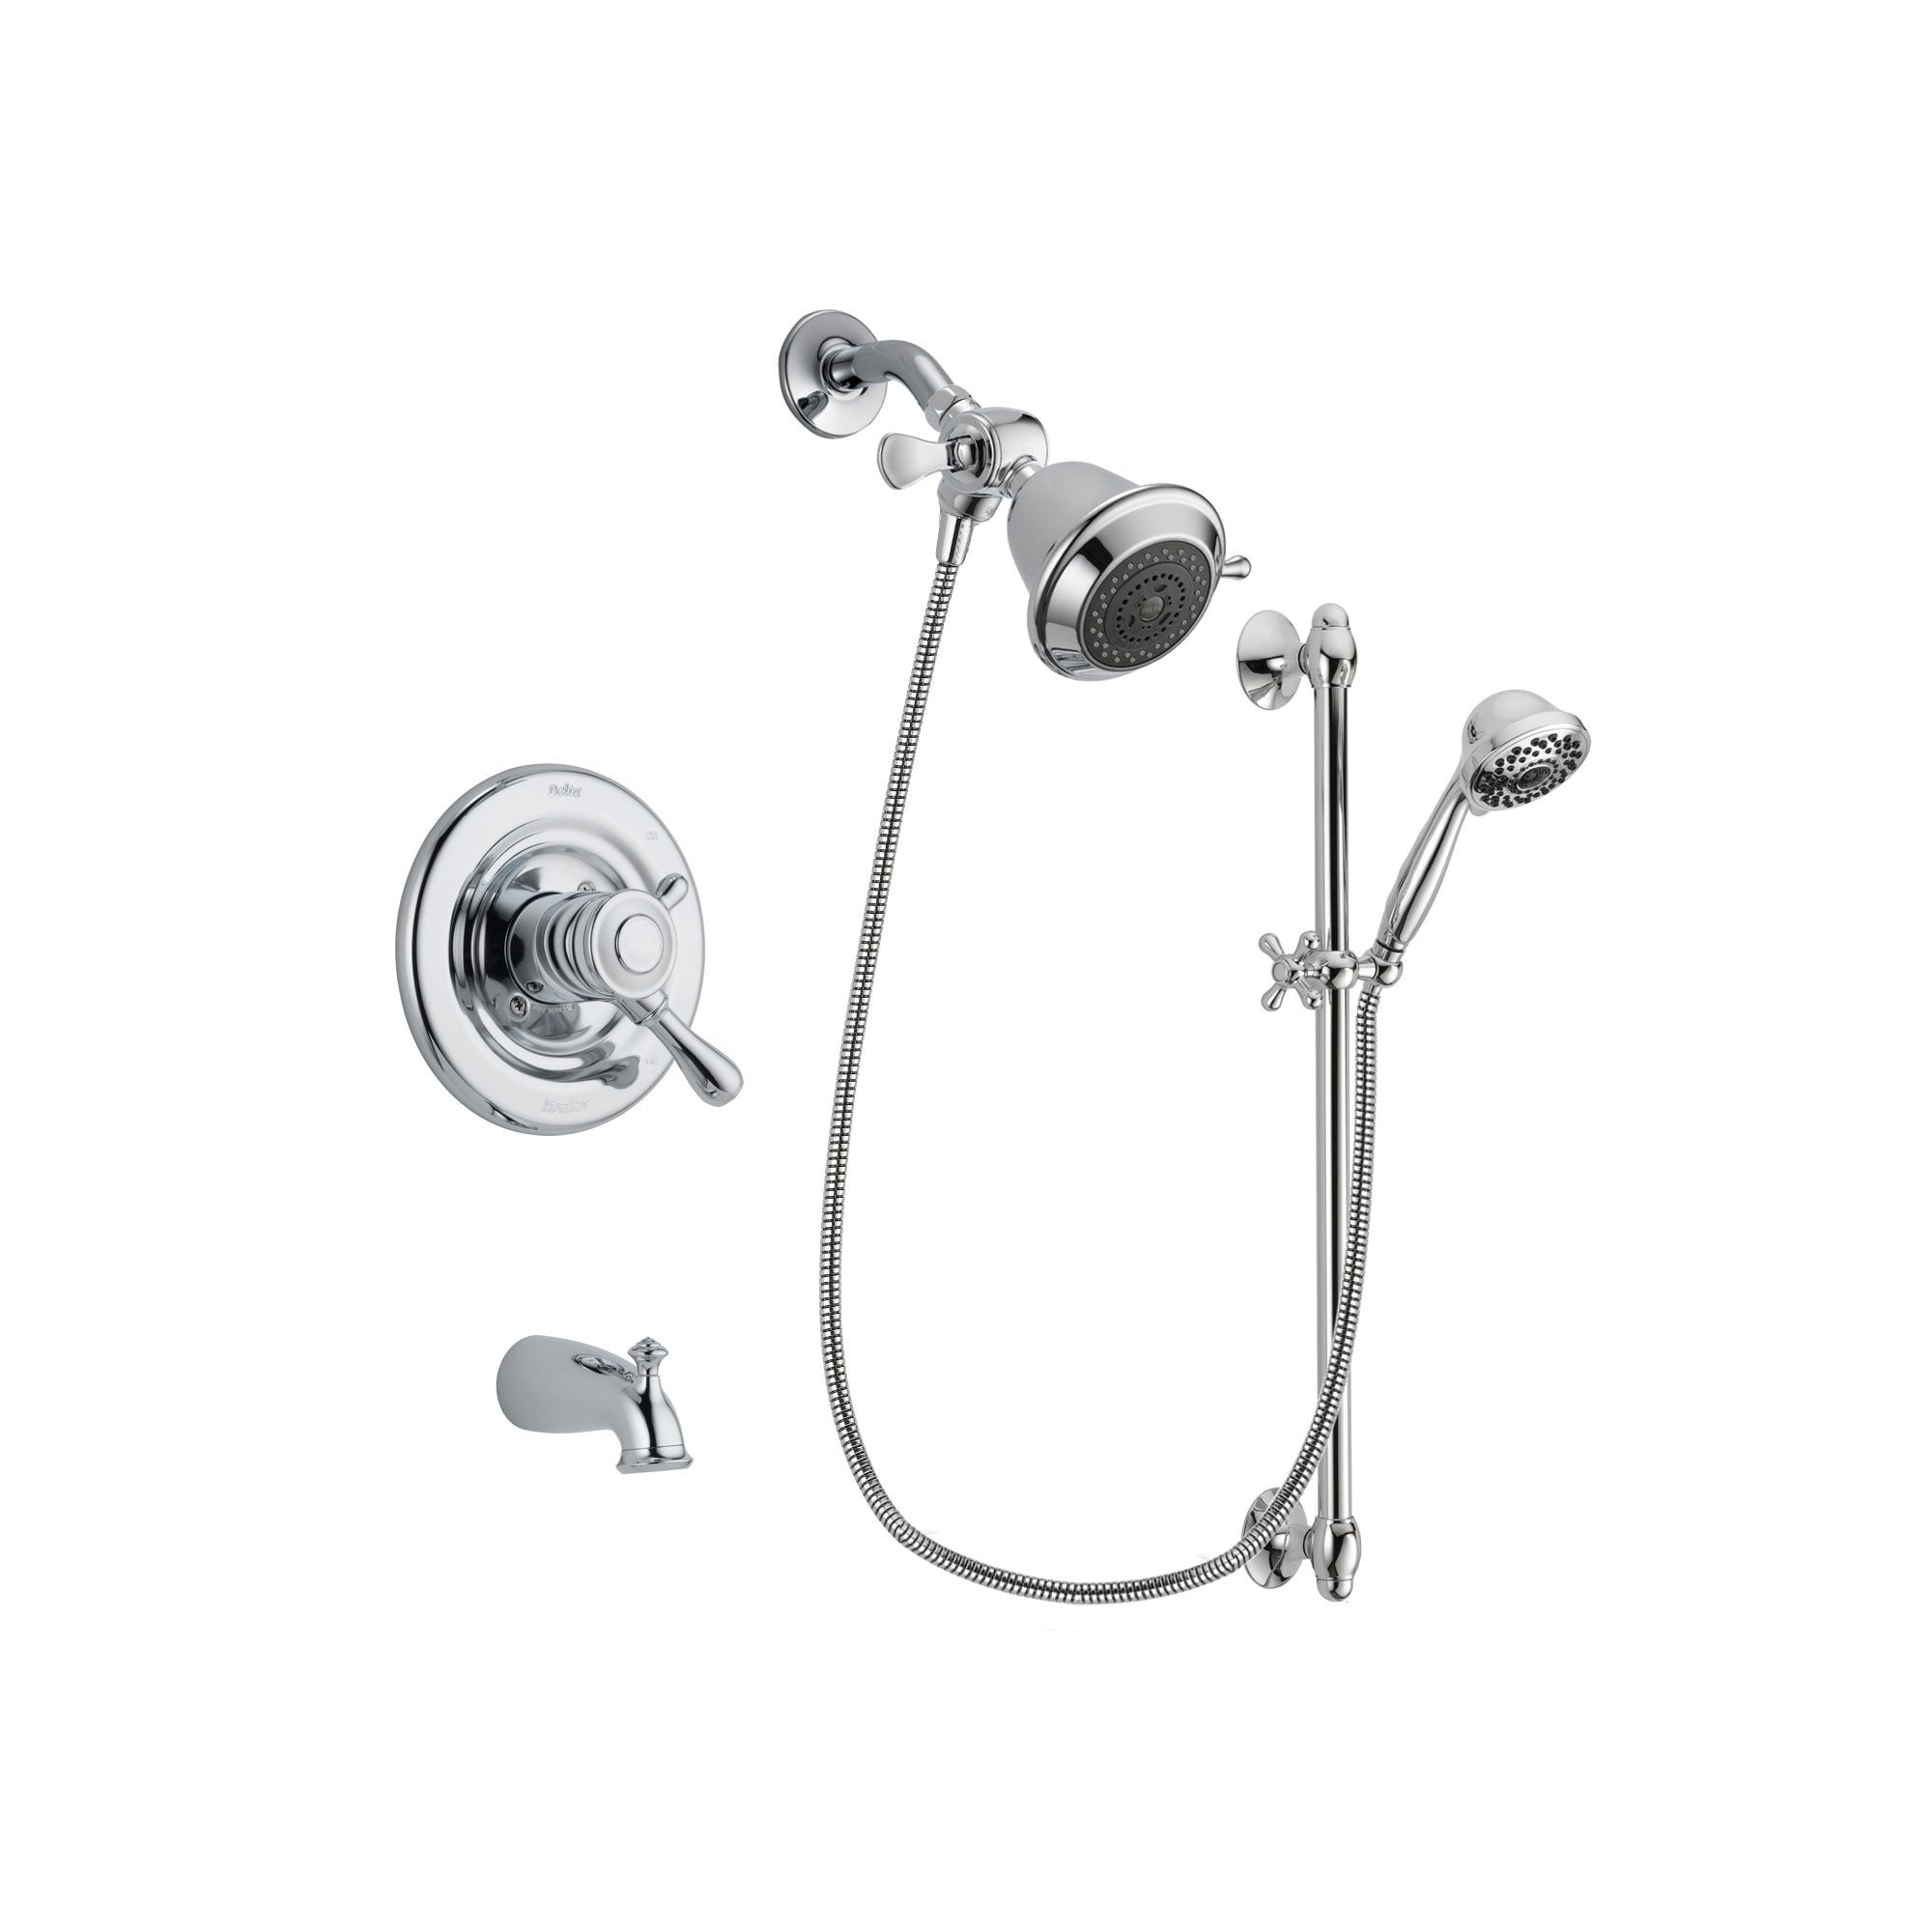 Delta Leland Chrome Finish Dual Control Tub and Shower Faucet System Package with Shower Head and 7-Spray Handheld Shower Sprayer with Slide Bar Includes Rough-in Valve and Tub Spout DSP0587V